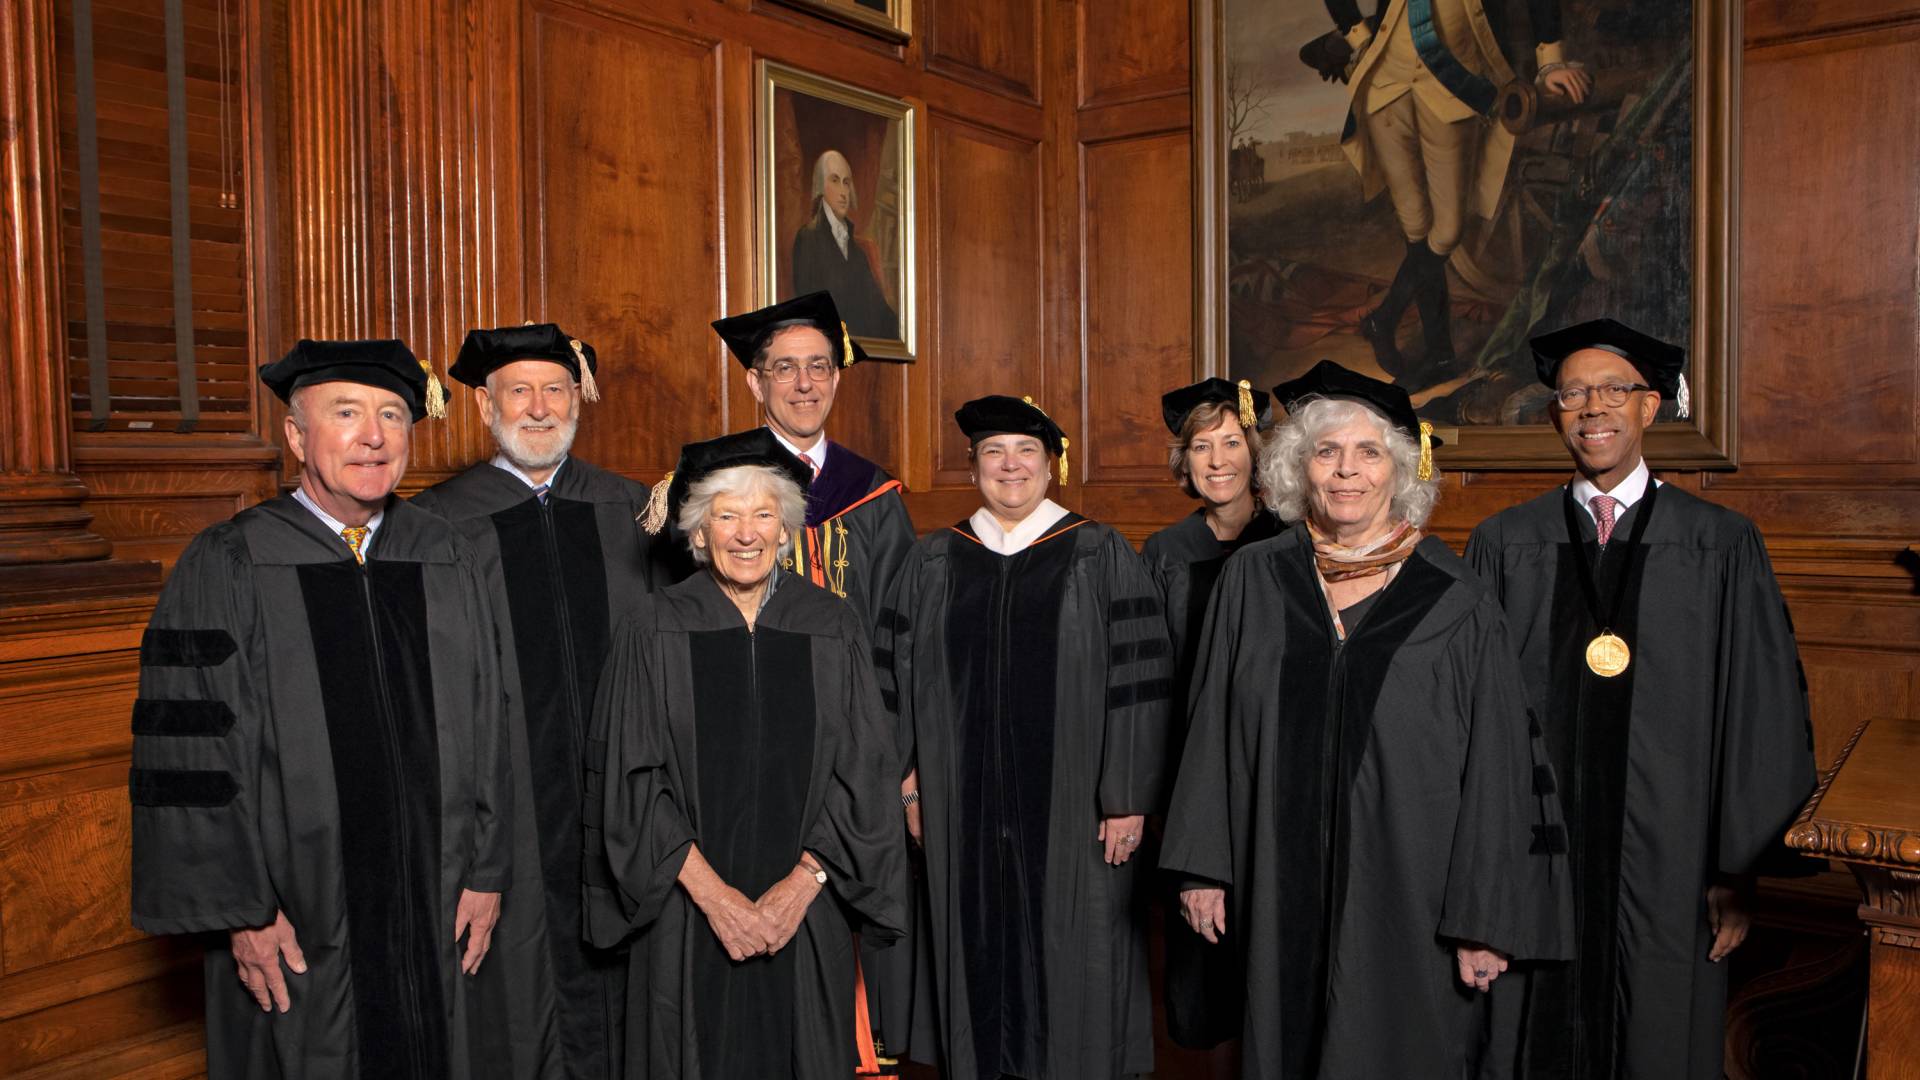 Recipients of honorary degrees pose in their ceremonial robes and mortarboards